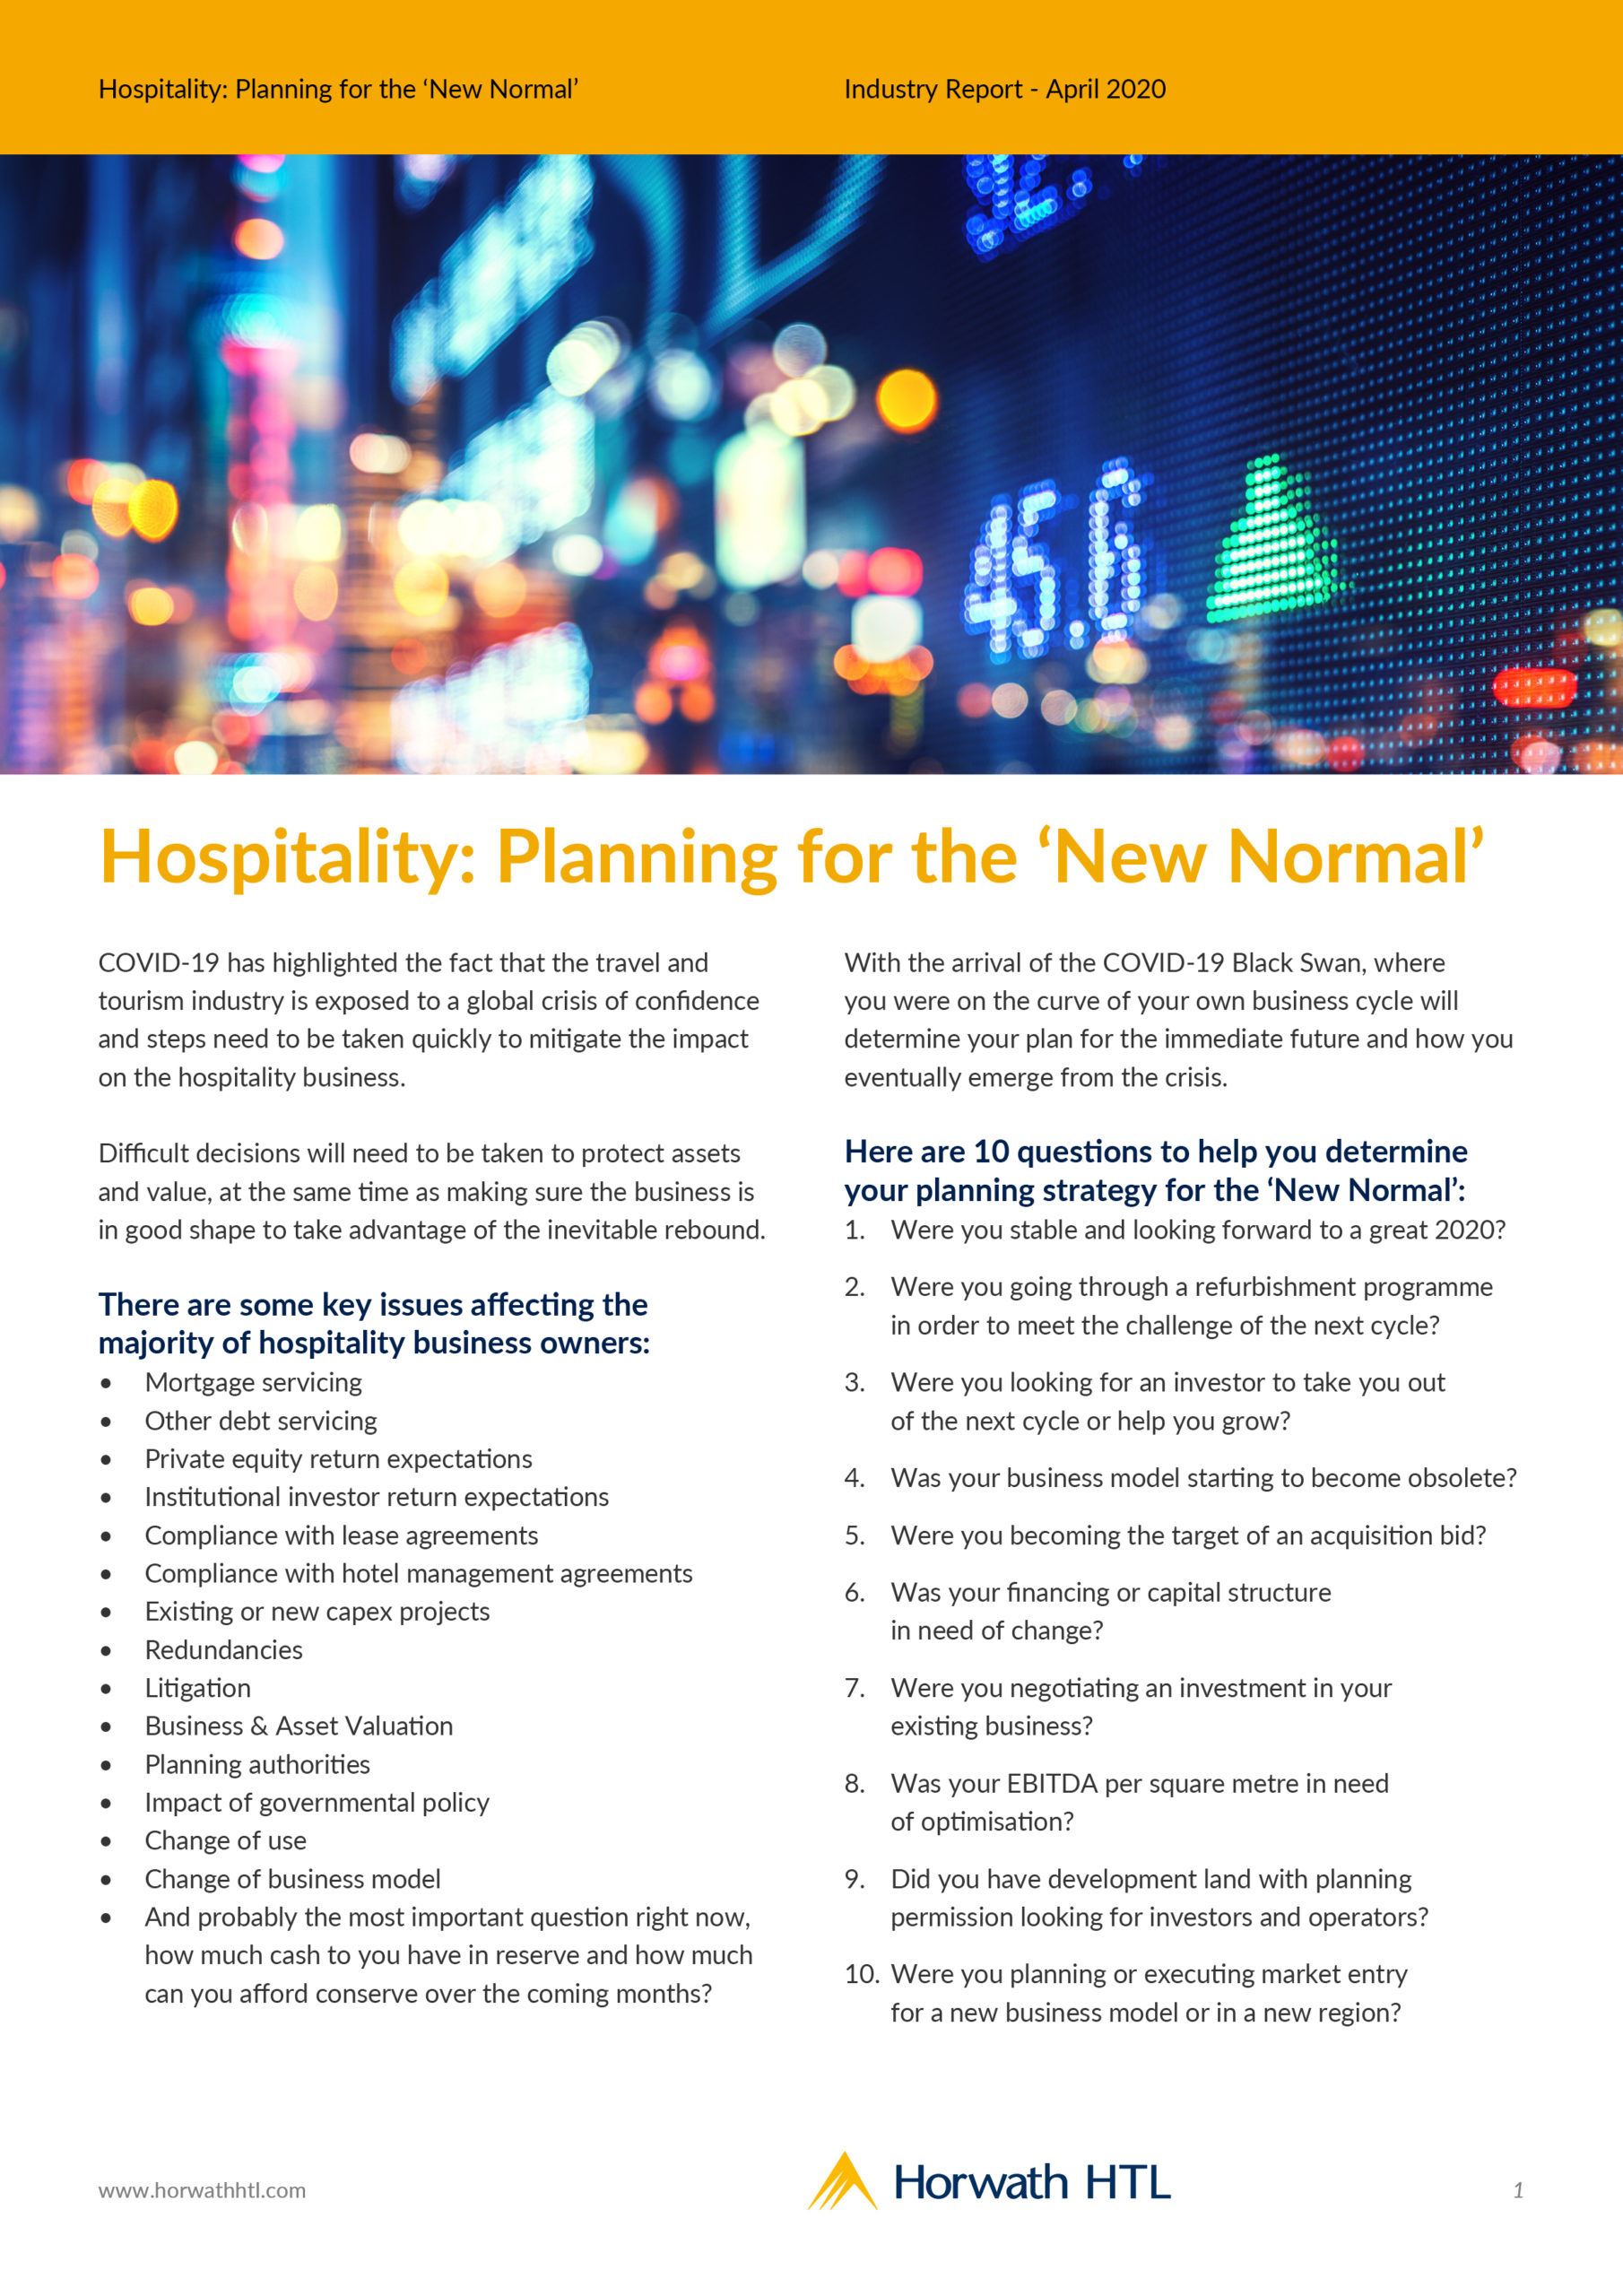 Hospitality Planning for the New Normal scaled 1